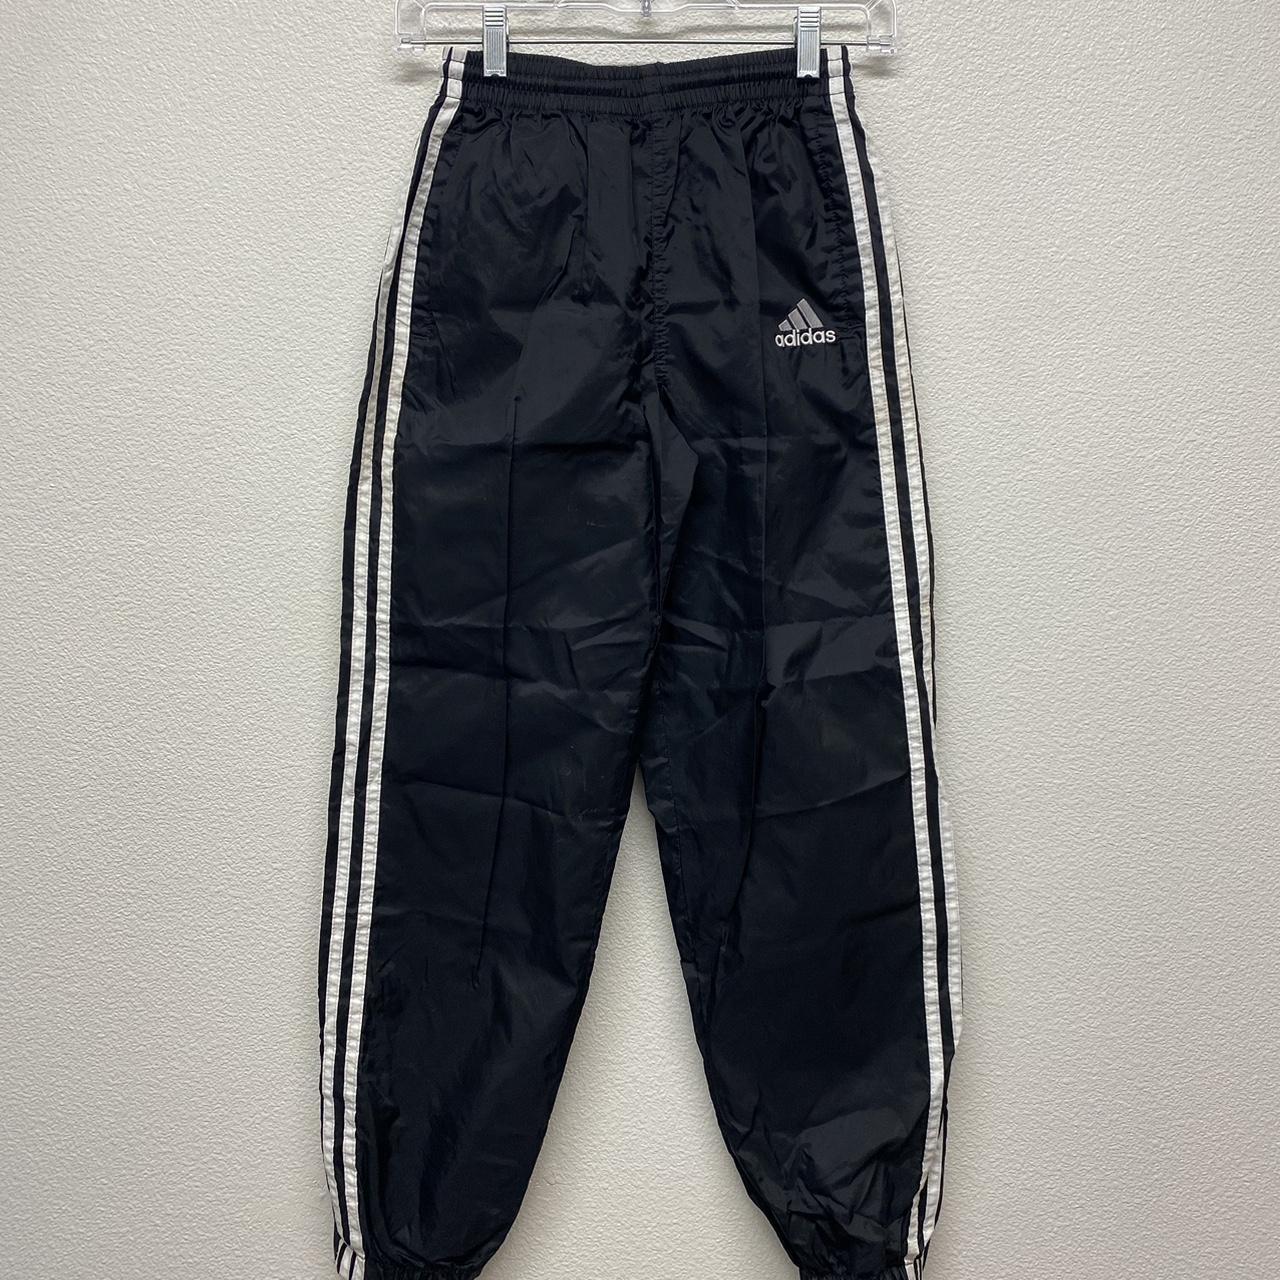 Found this Vintage Adidas Track Pants. Is it legit? Zippers are